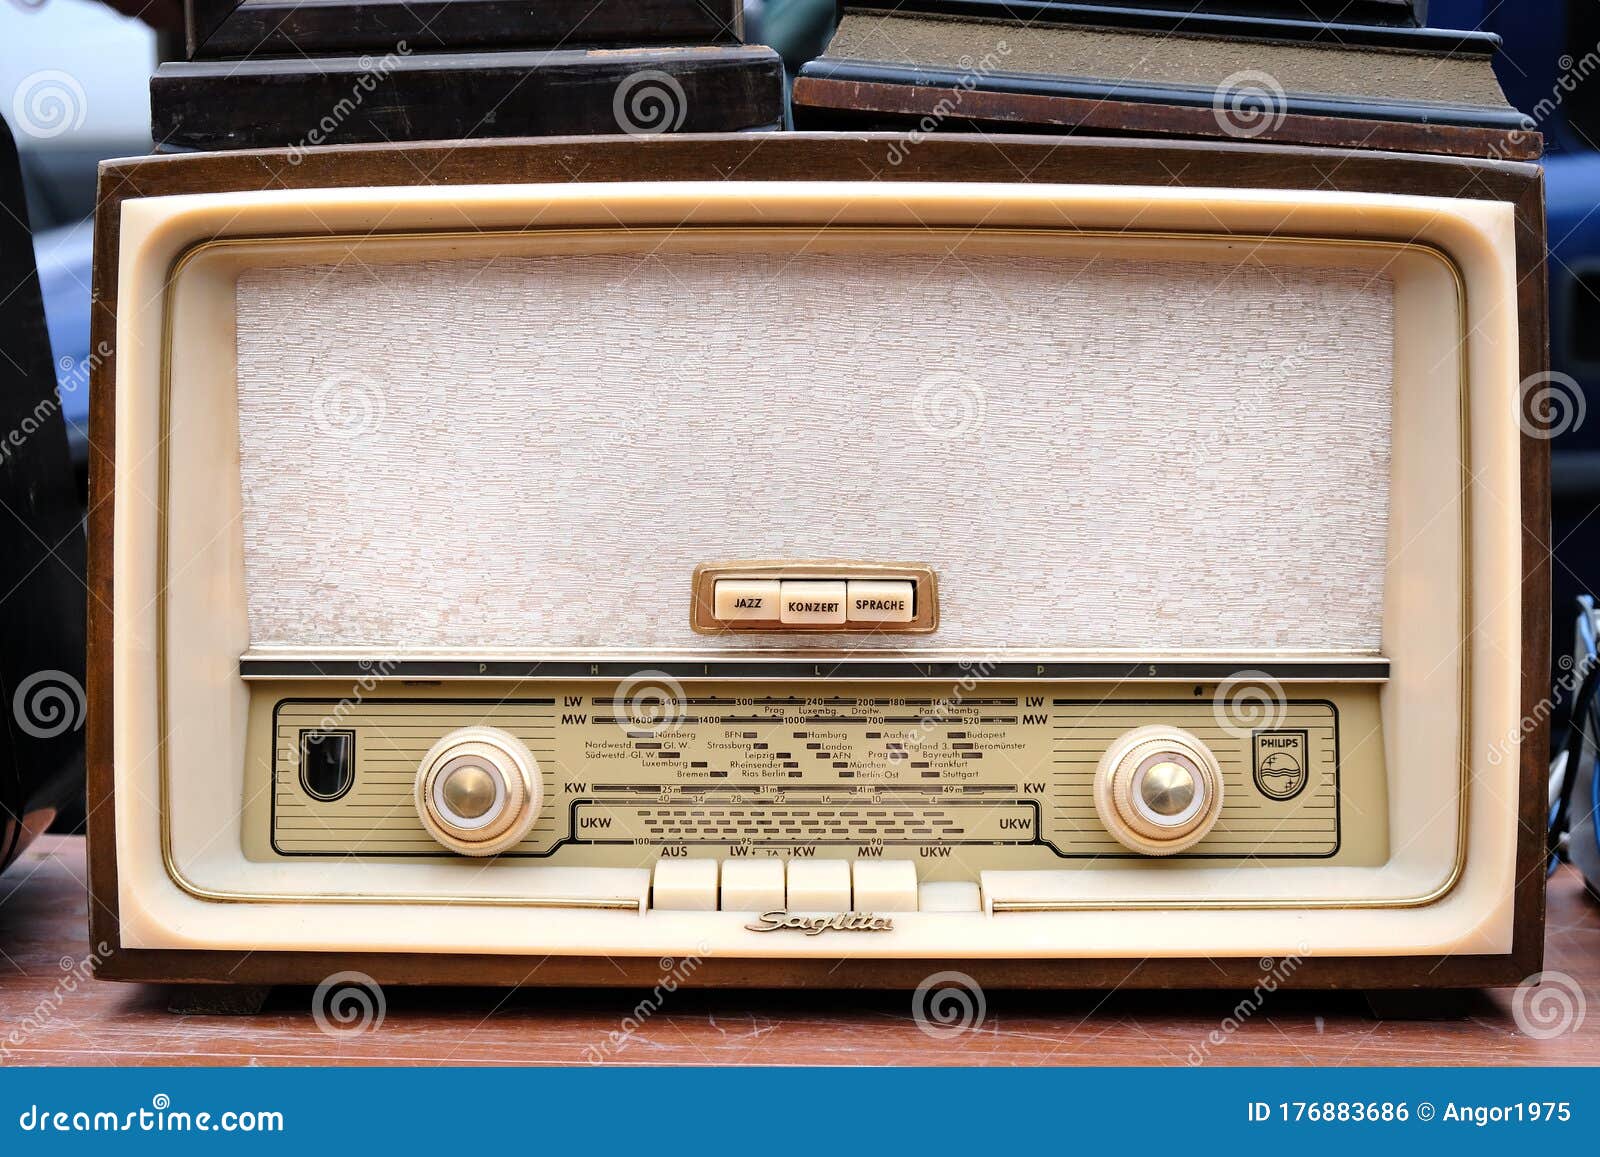 exaggerate Slippery But Old Vintage Radio Philips on a Flea Market Editorial Photo - Image of radio,  entertainment: 176883686